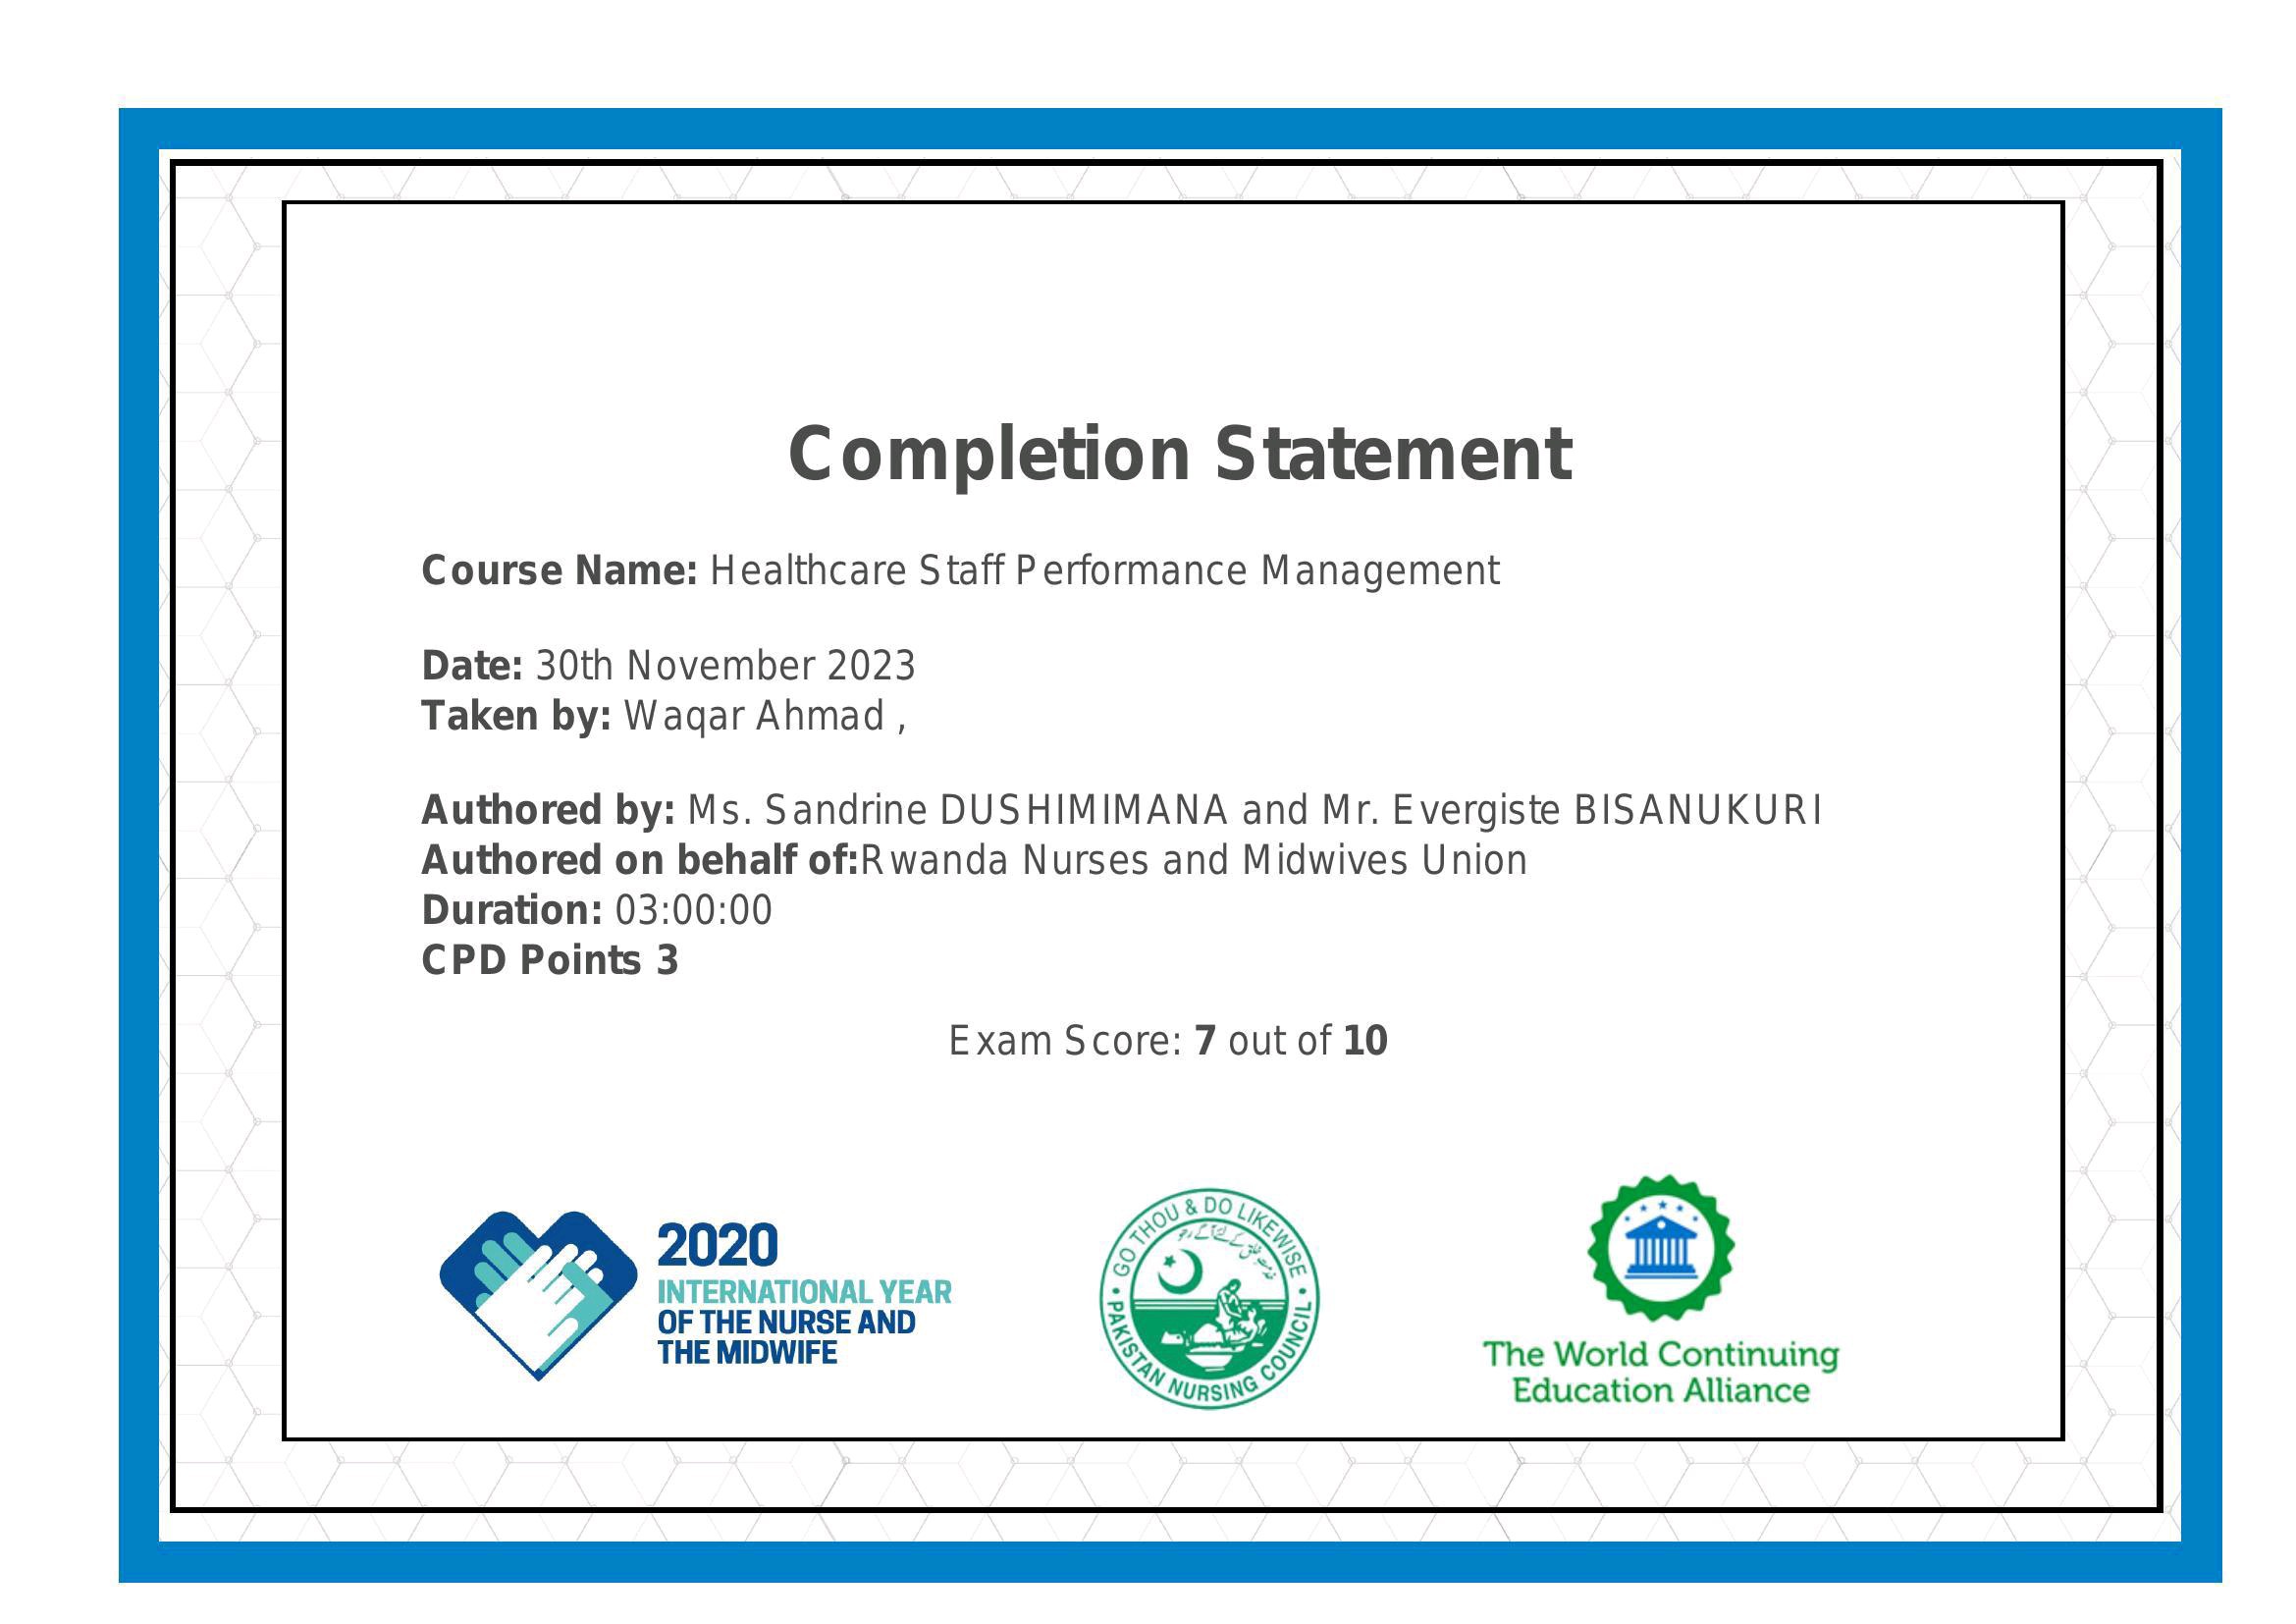 Completion Statement

Course Name: Healthcare Staff Performance Management

Date: 30th November 2023
Taken by: Wagar Ahmad ,

Authored by: Ms. Sandrine DUSHIMIMANA and Mr. Evergiste BISANUKURI
Authored on behalf of:Rwanda Nurses and Midwives Union

Duration: 03:00:00

CPD Points 3

Exam Score: 7 out of 10

INTERNATIONAL YEAR :

OF THE NURSE AND Ry

THE MIDWIFE : The World Continuing
Education Alliance